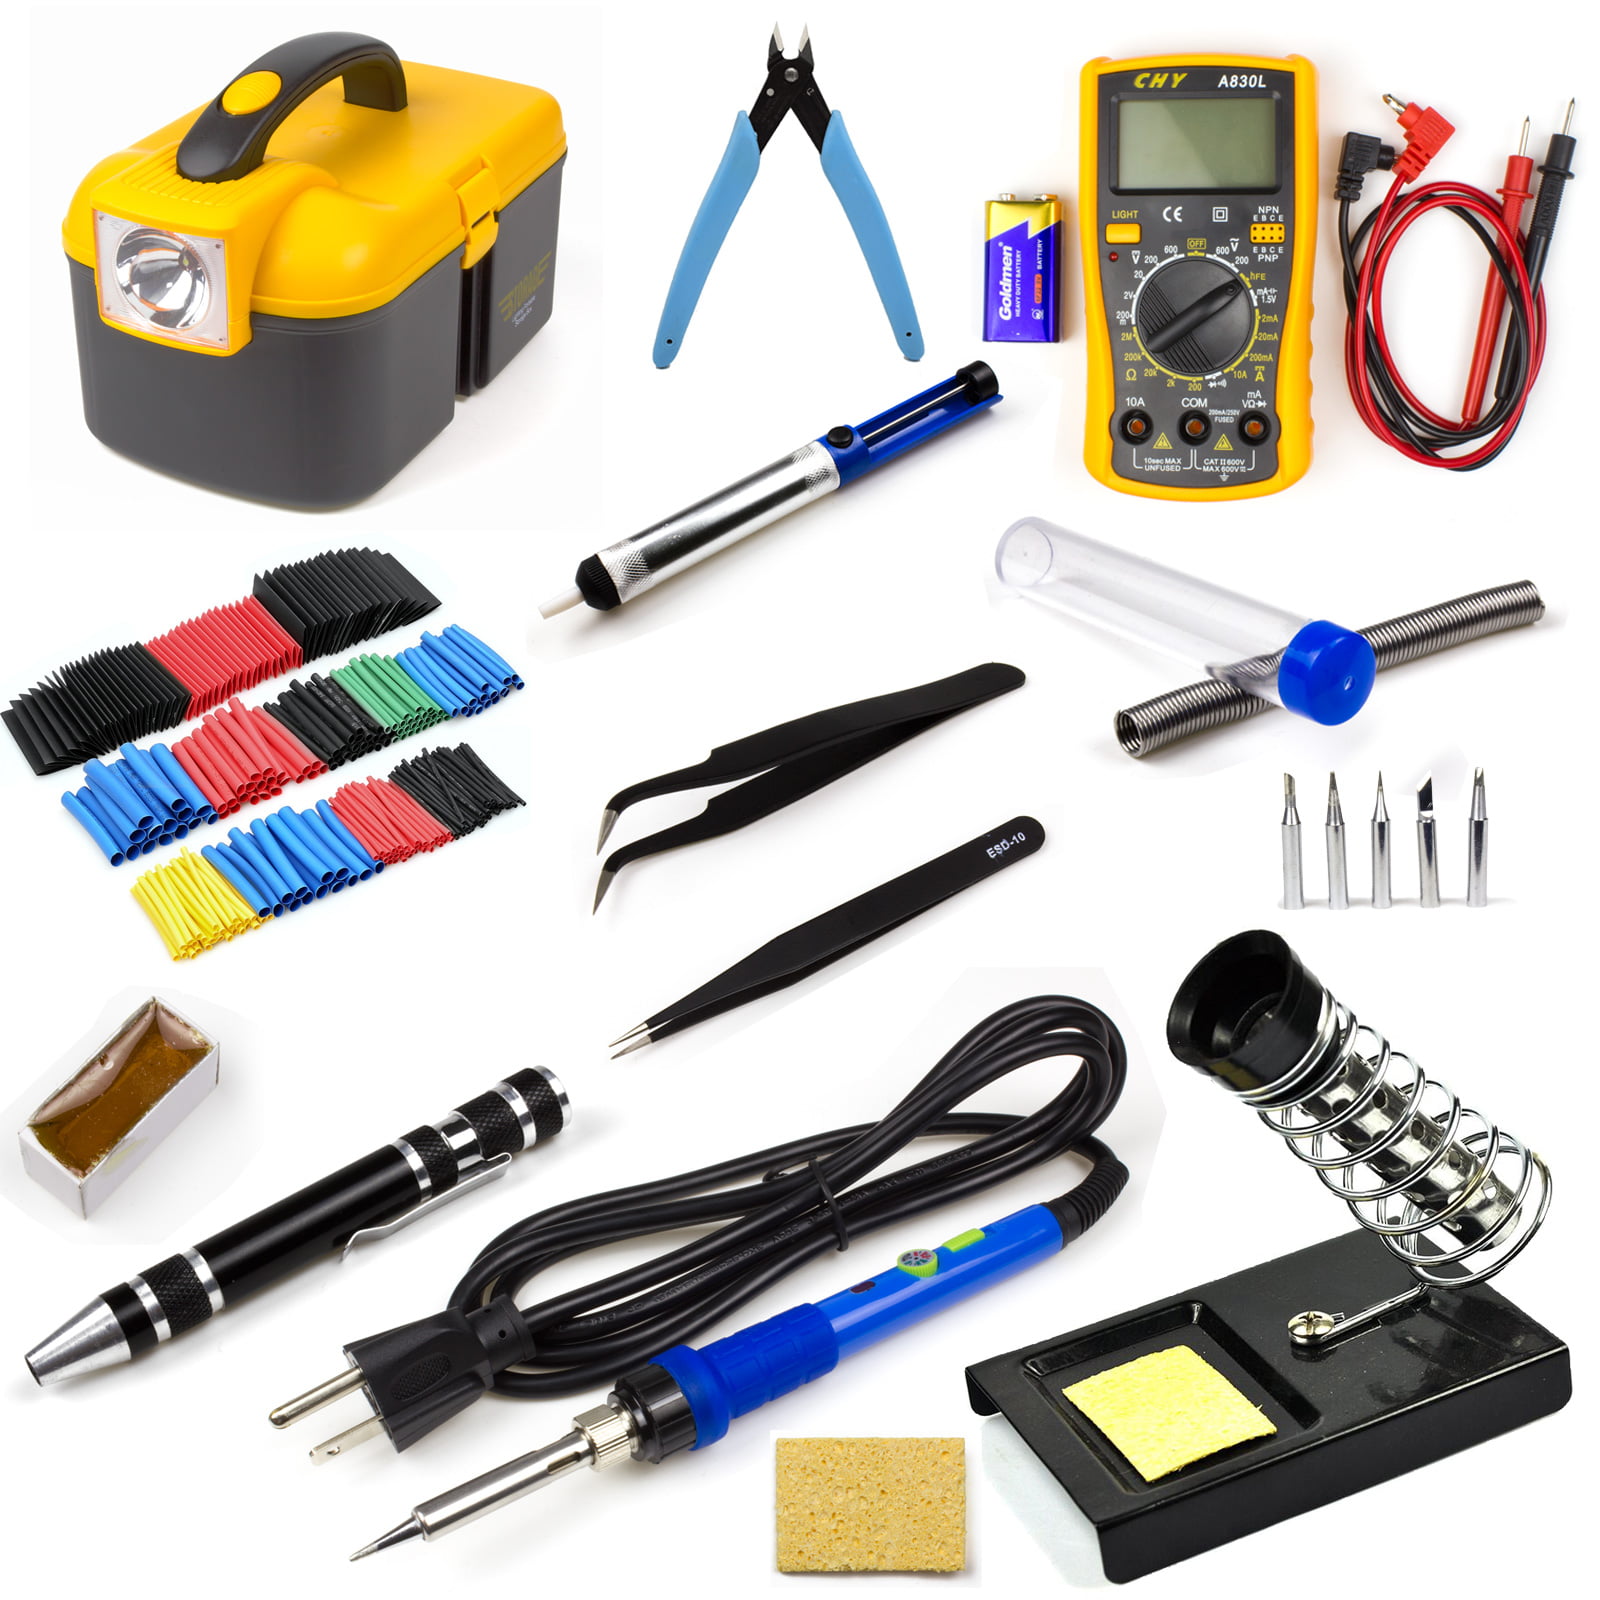 Welding Tool Soldering Iron Stand WRLSUN 60W Adjustable Temperature Electric Soldering Iron 110V with ON/OFF Switch Updated Soldering Iron Kit Digital Multimeter 